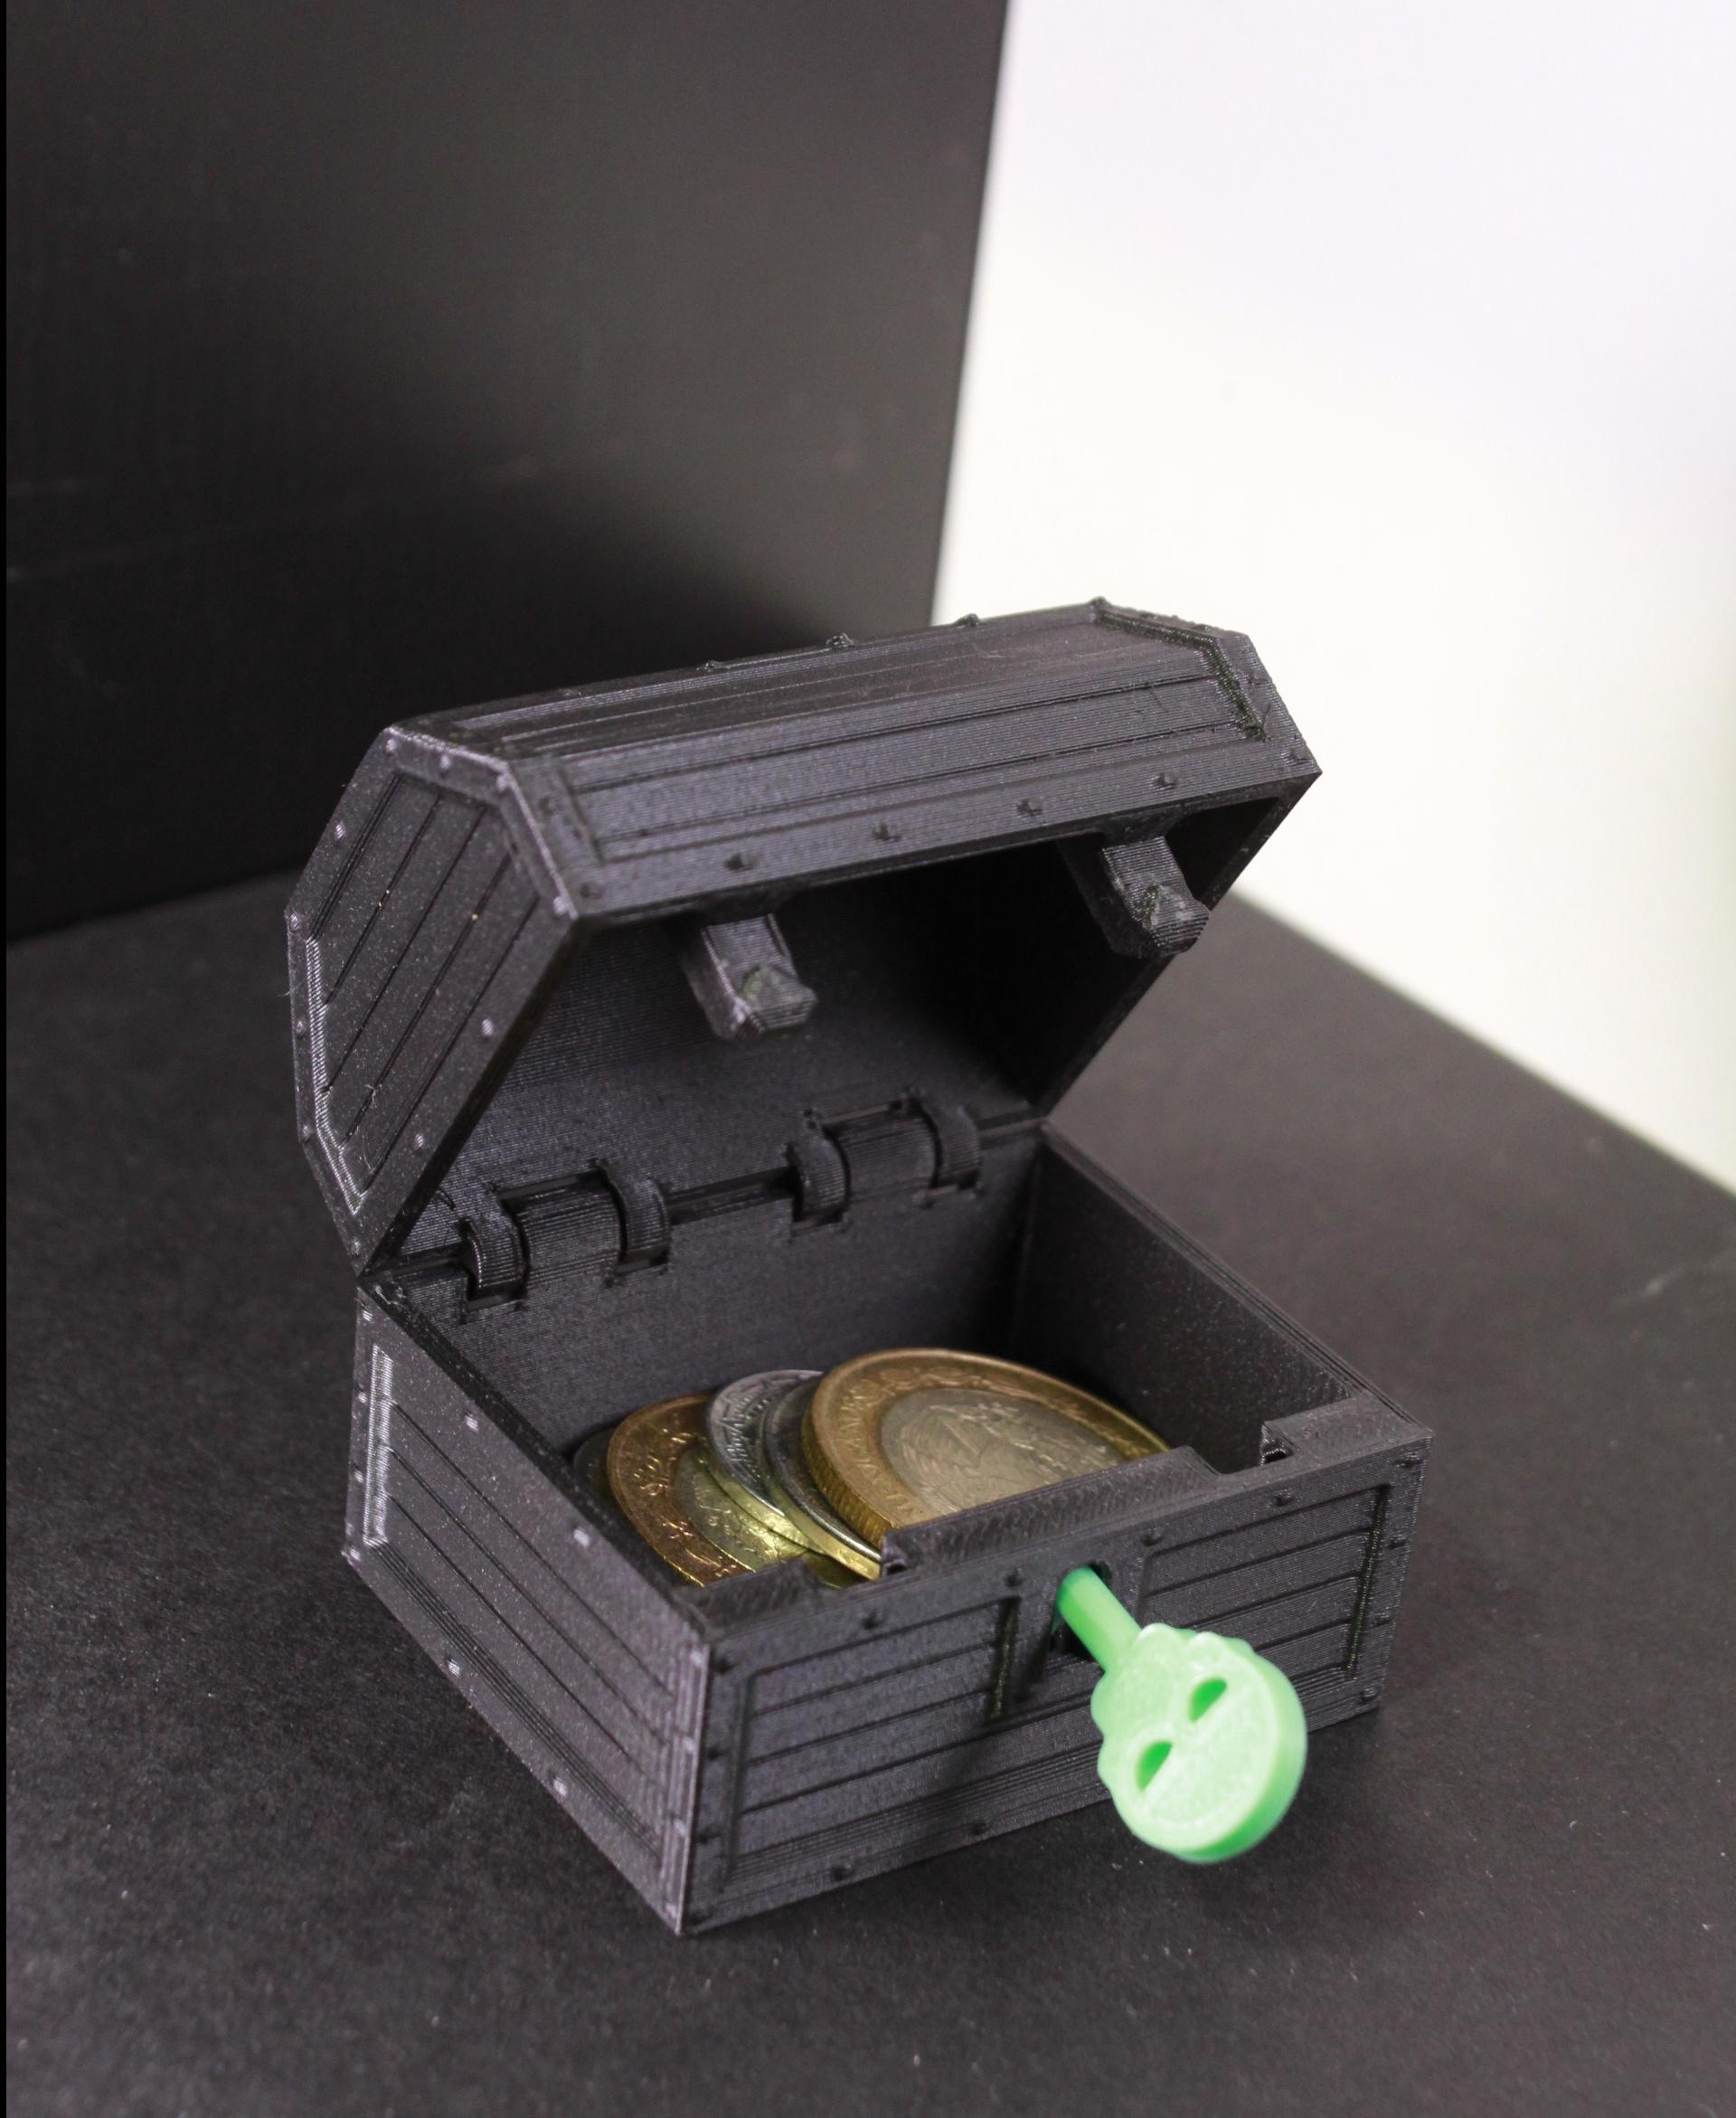 Print-in-Place Treasure Chest with Functional Lock - This is a make I did on Jaatinen3D's Print-in-Place Treasure Chest. Turned out very well! The functional lock is super cool! - 3d model